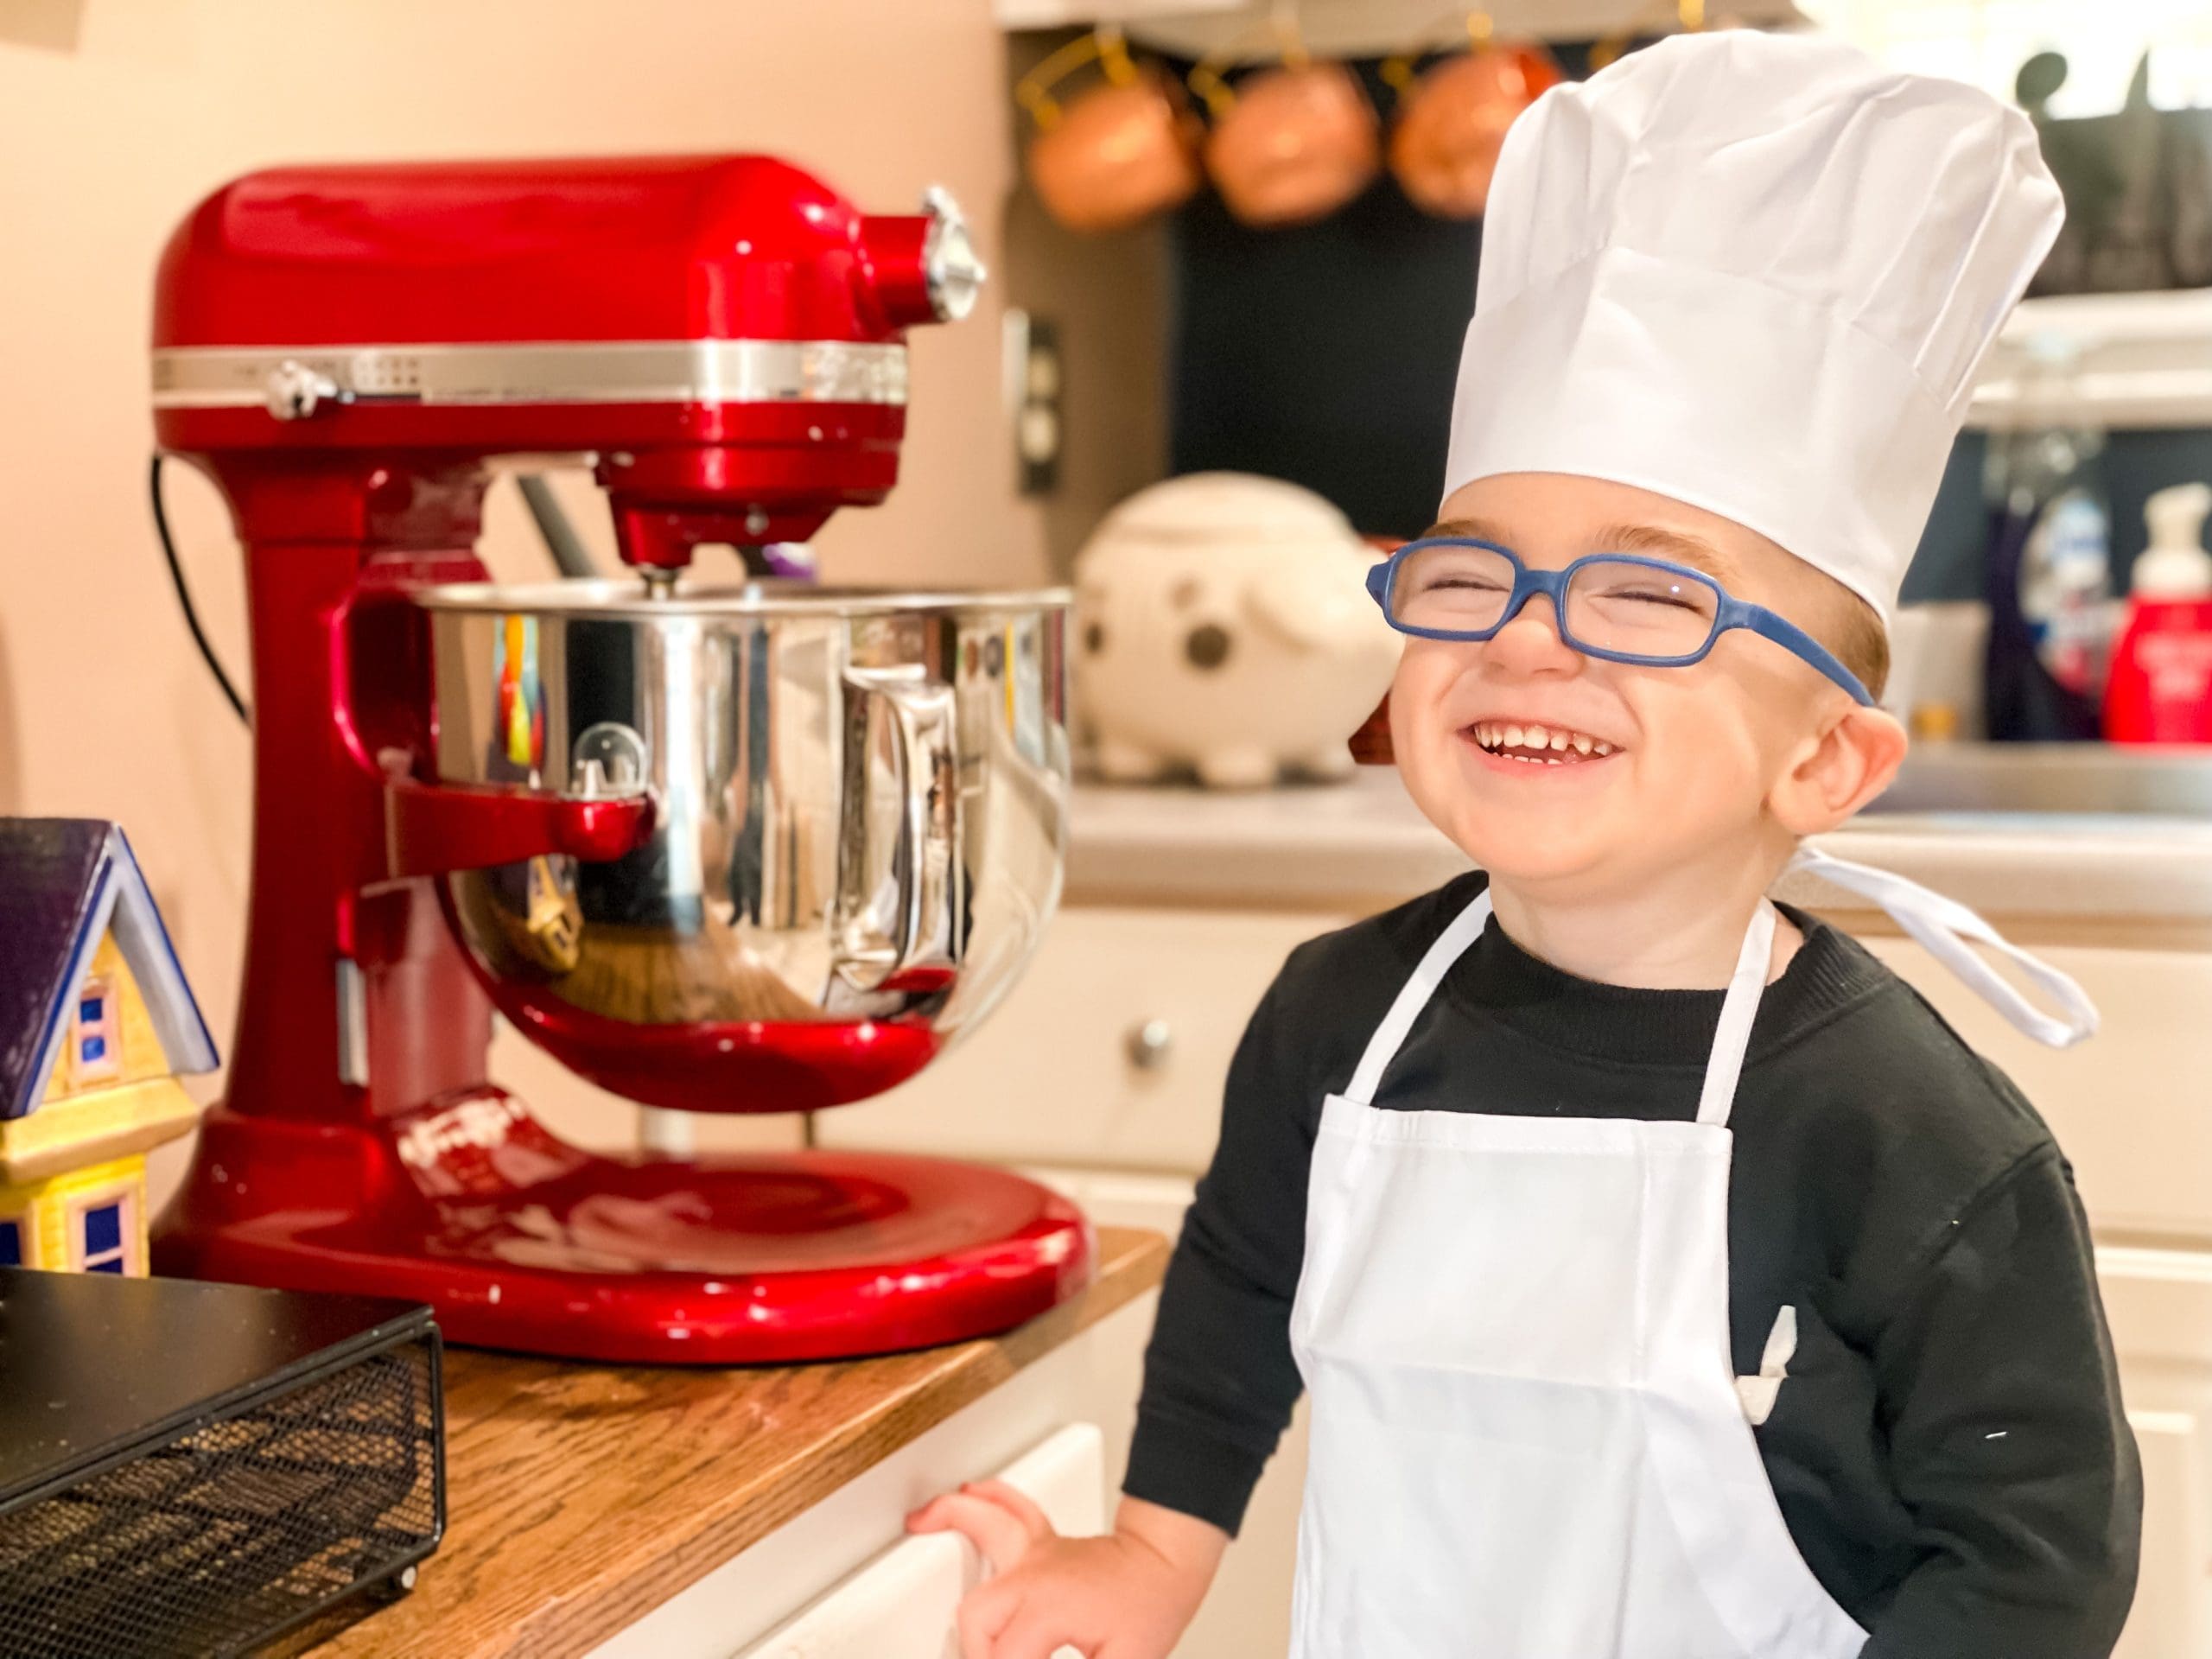 Boy in chefs hat and apron in the kitchen with a red mixer